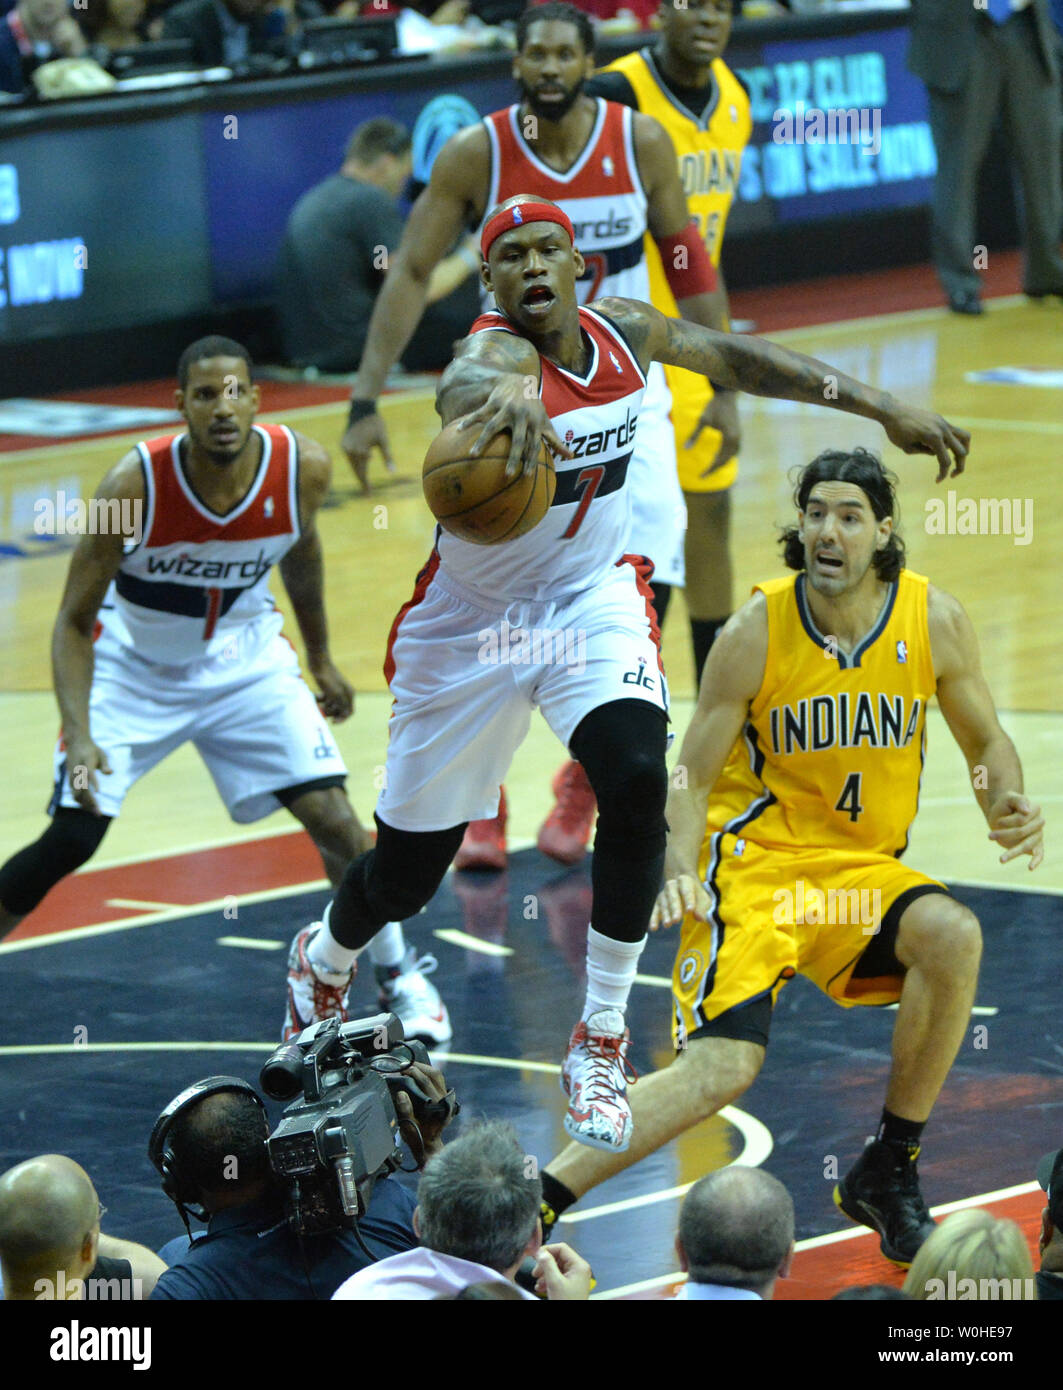 Washington Wizards forward Al Harrington (7) saves the ball from going out of bounds as the Wizards play the Indiana Pacers during the 1st half of game six of the Eastern Conference Semifinals at the Verizon Center in Washington, D.C. on May 15, 2014. UPI/Kevin Dietsch Stock Photo